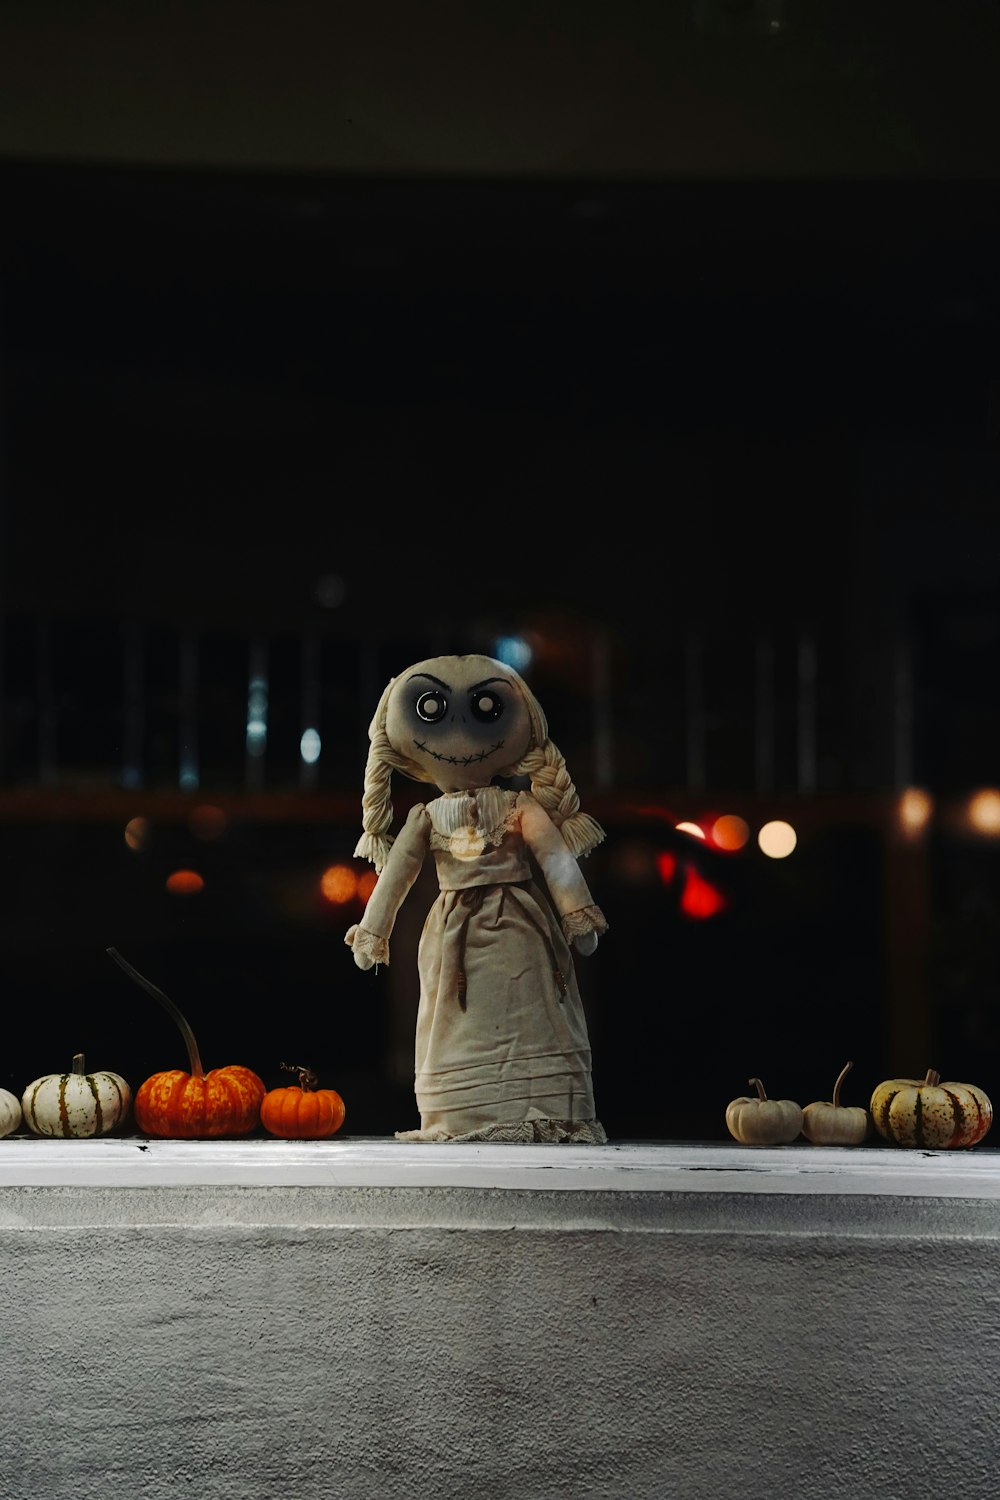 a stuffed animal is standing in front of pumpkins